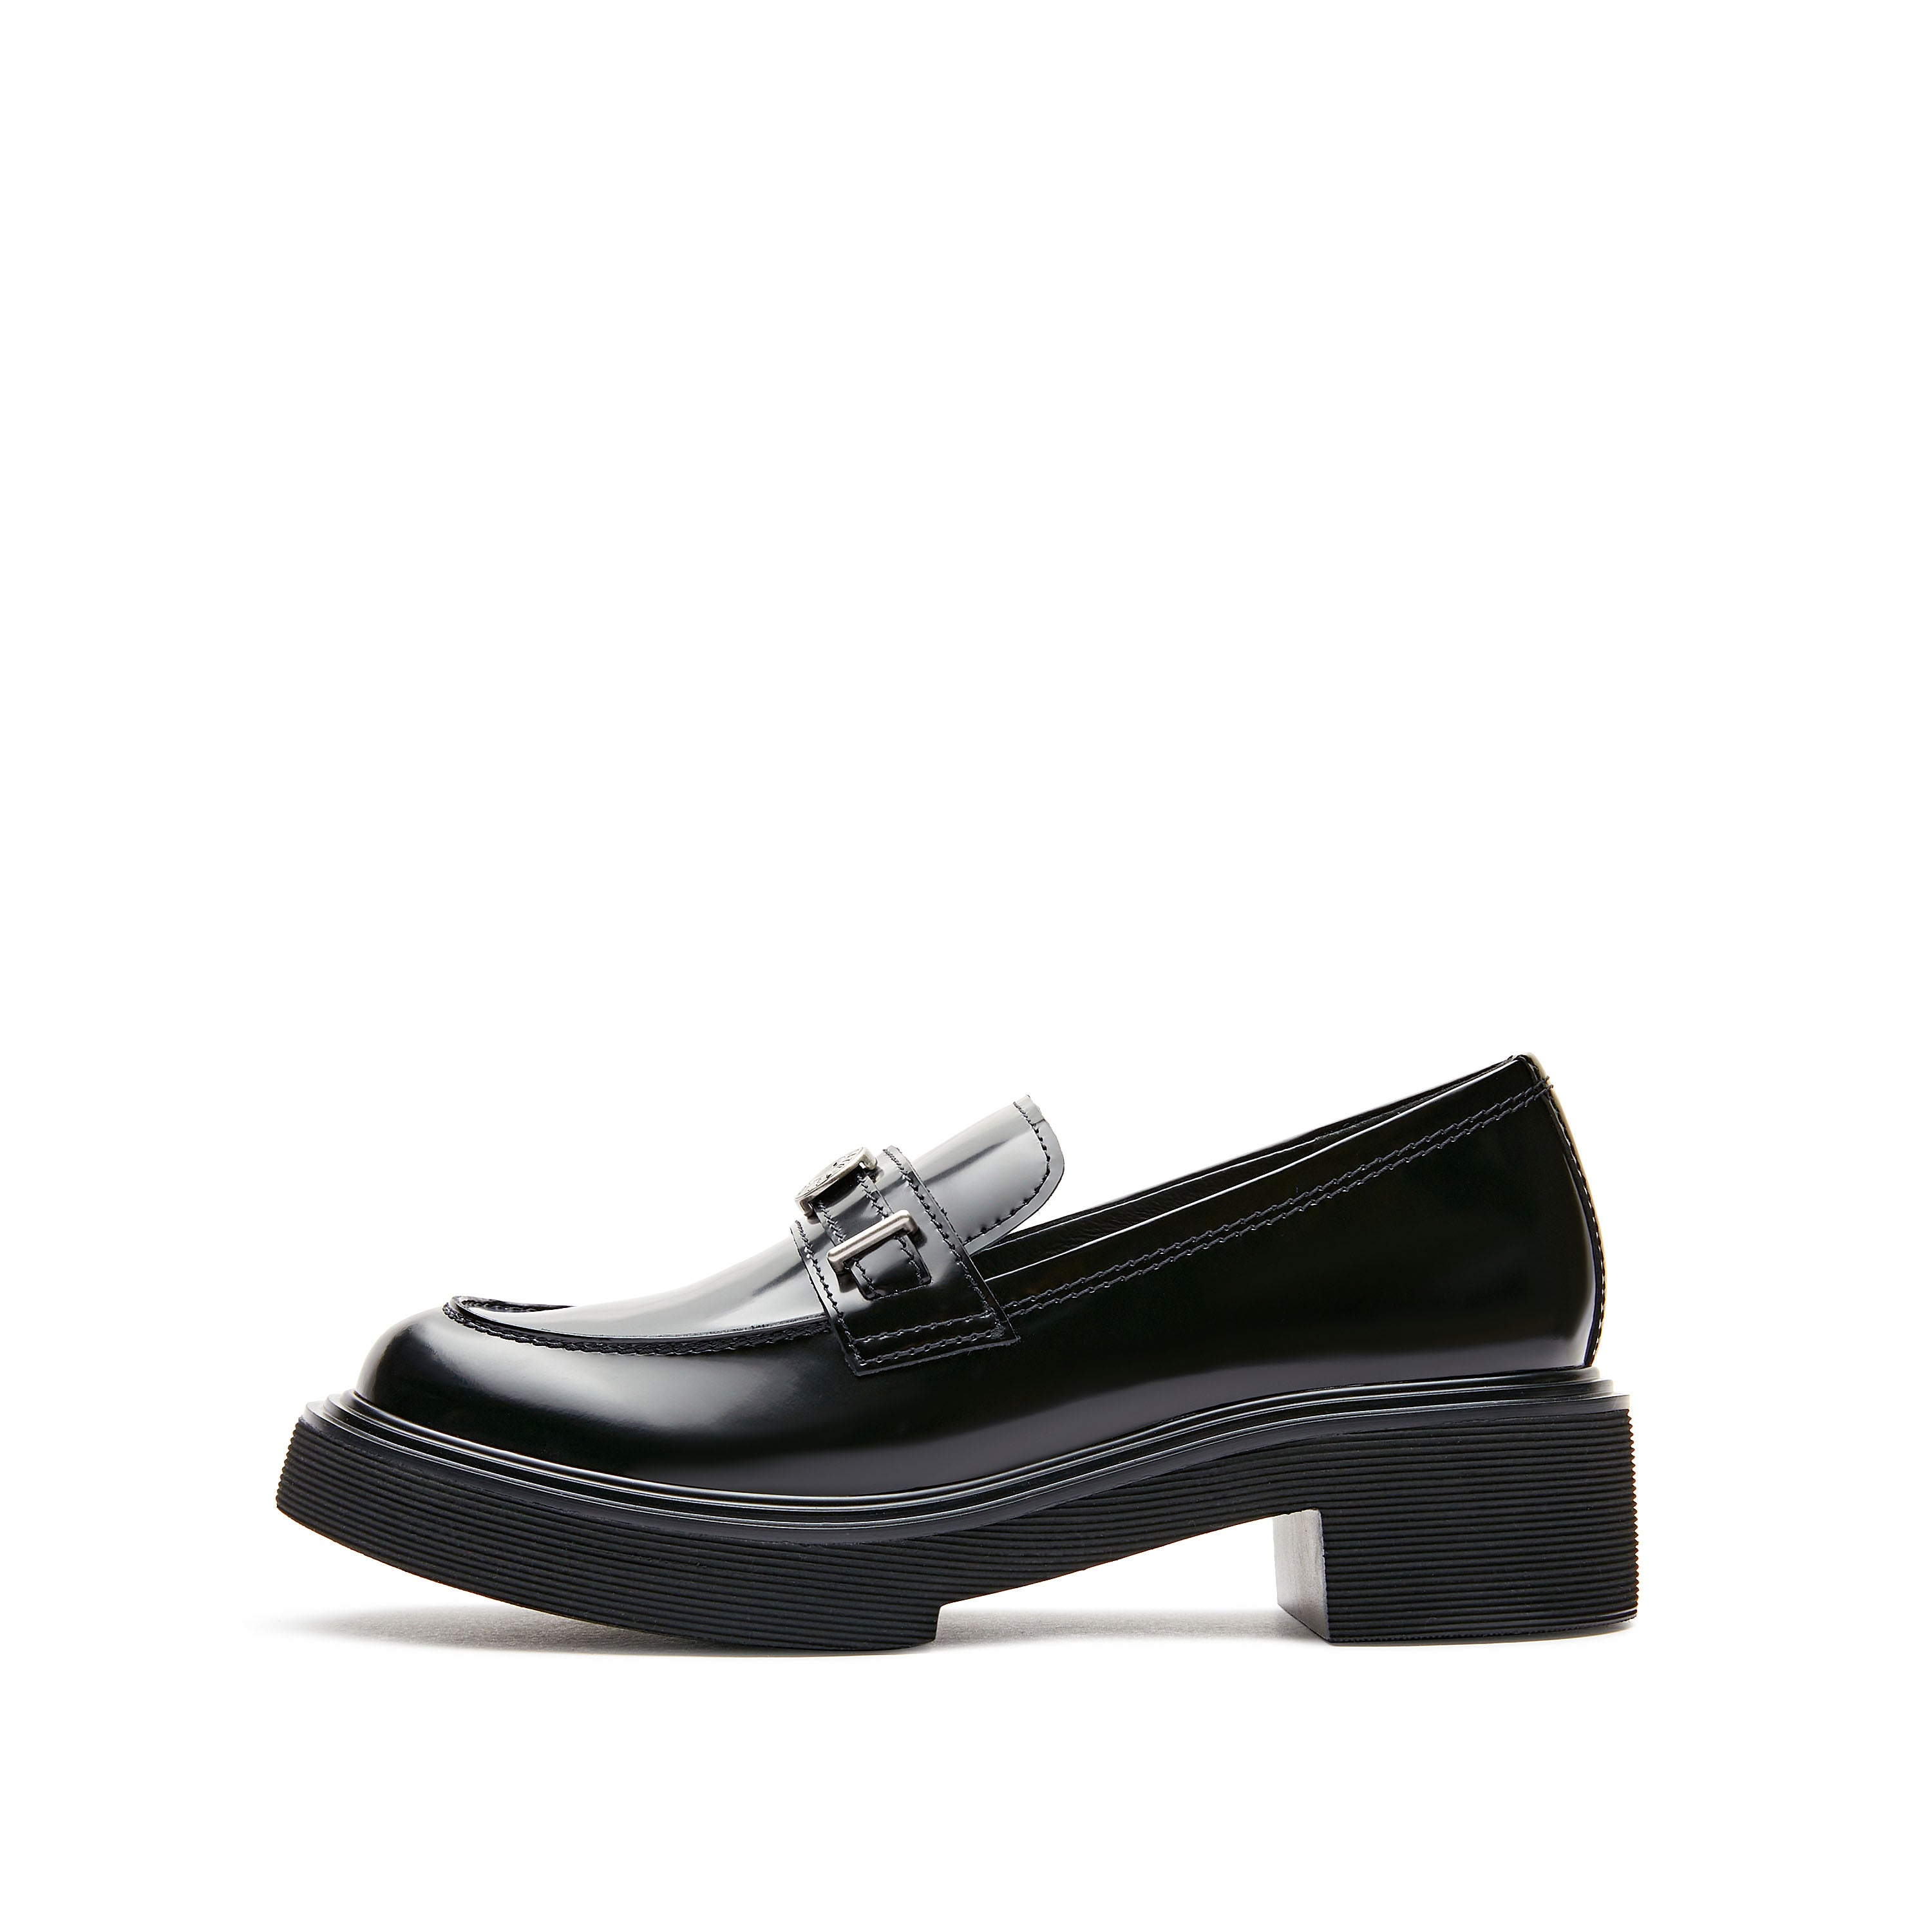 Black ST Buckle leather Loafers